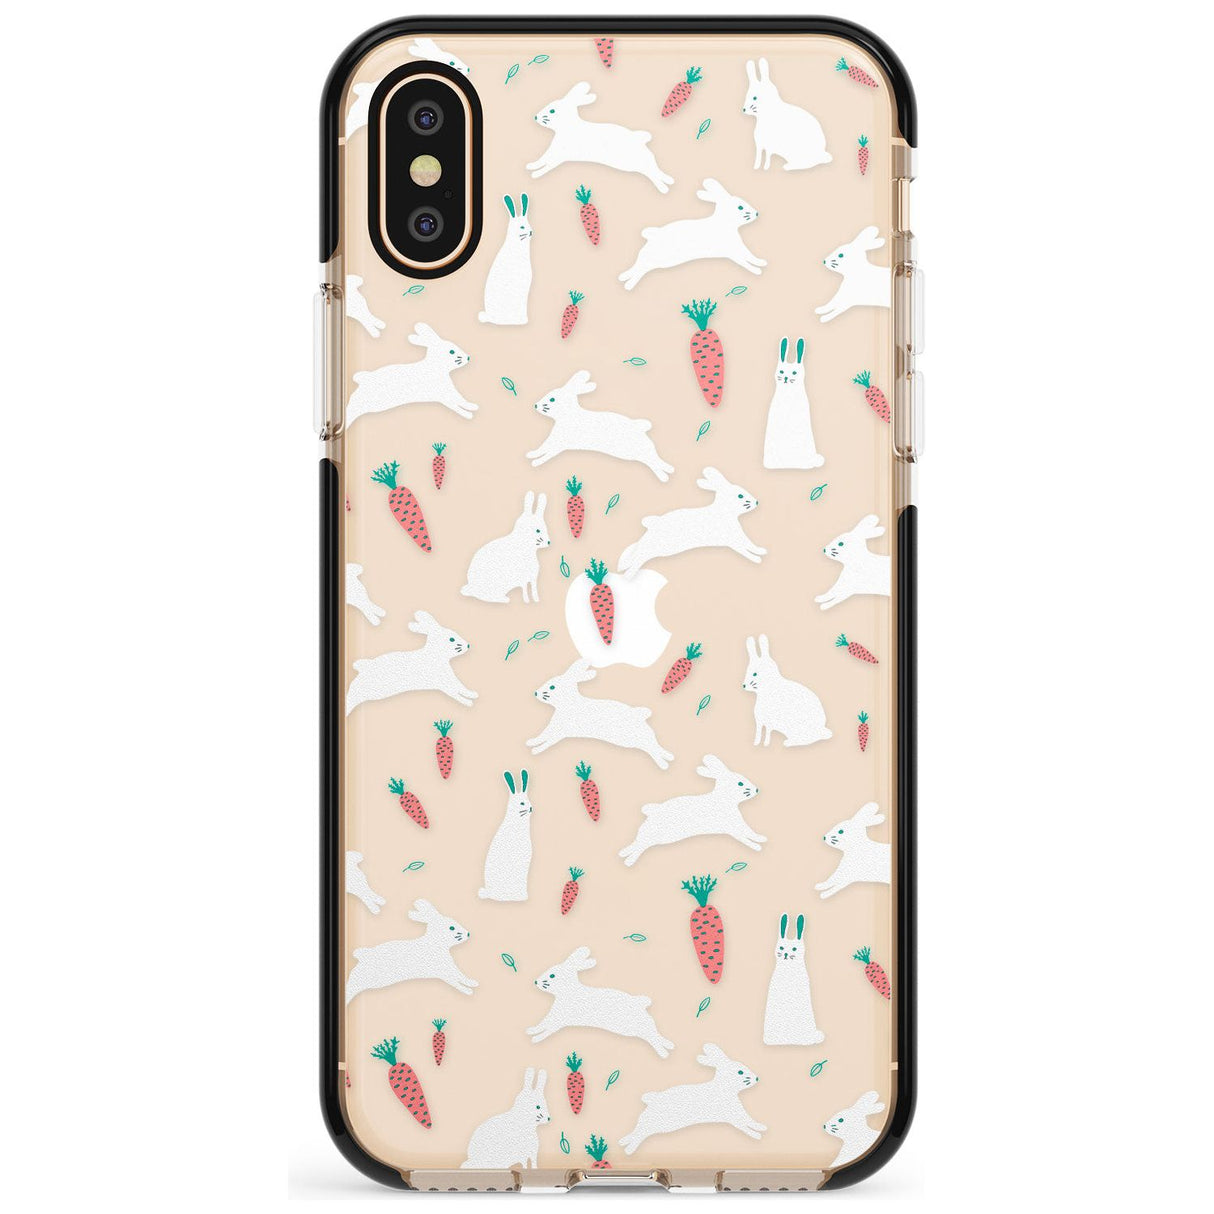 White Bunnies and Carrots Black Impact Phone Case for iPhone X XS Max XR